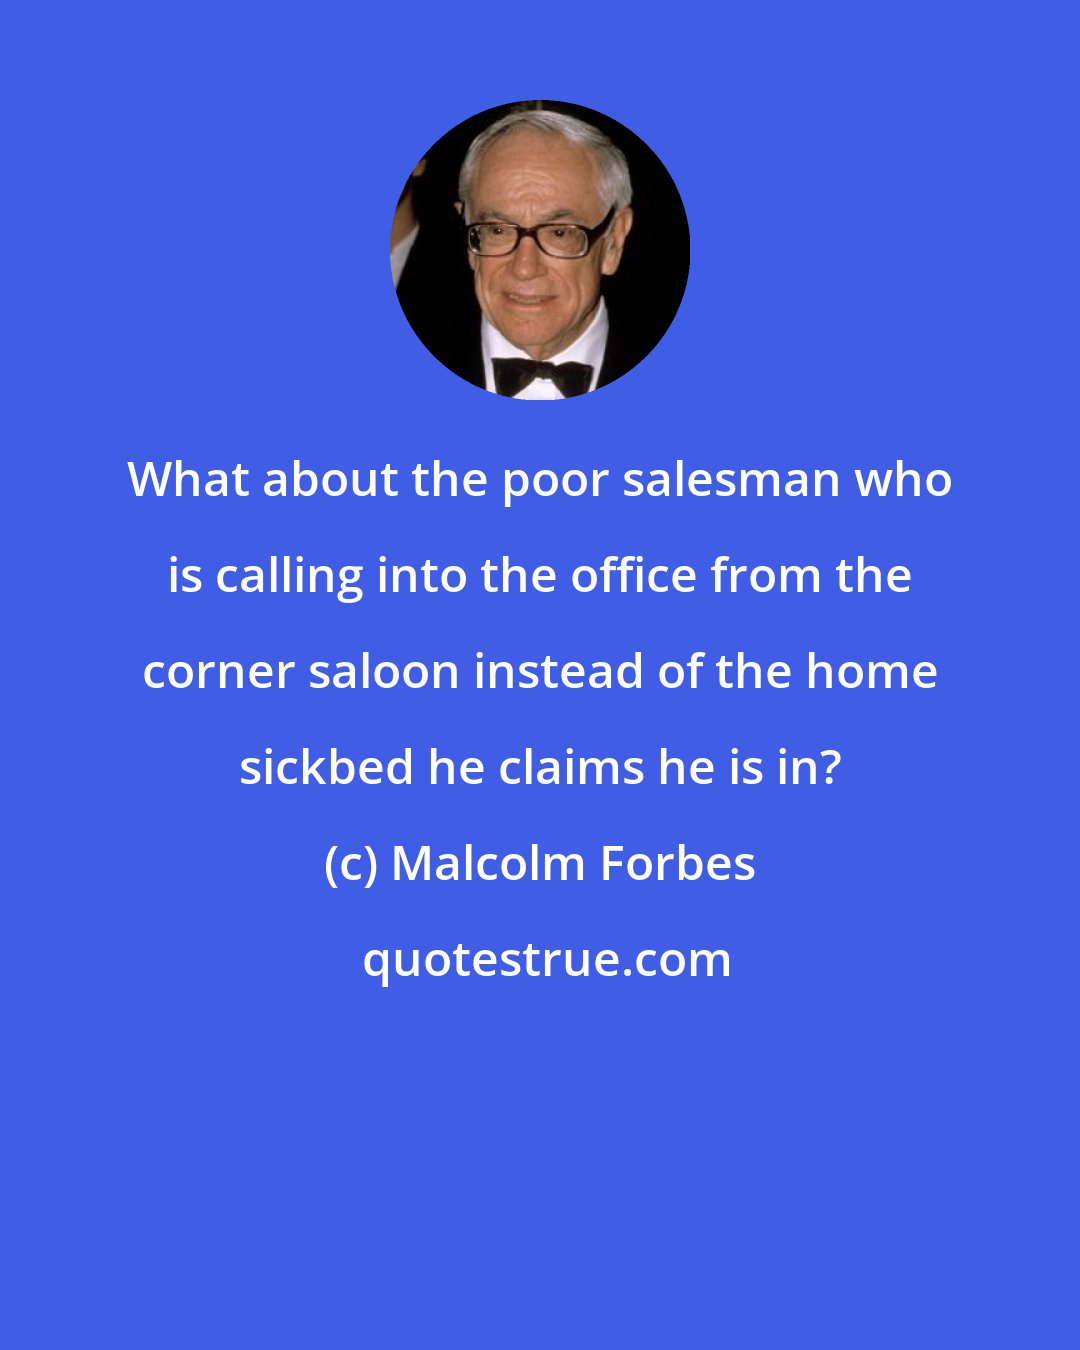 Malcolm Forbes: What about the poor salesman who is calling into the office from the corner saloon instead of the home sickbed he claims he is in?